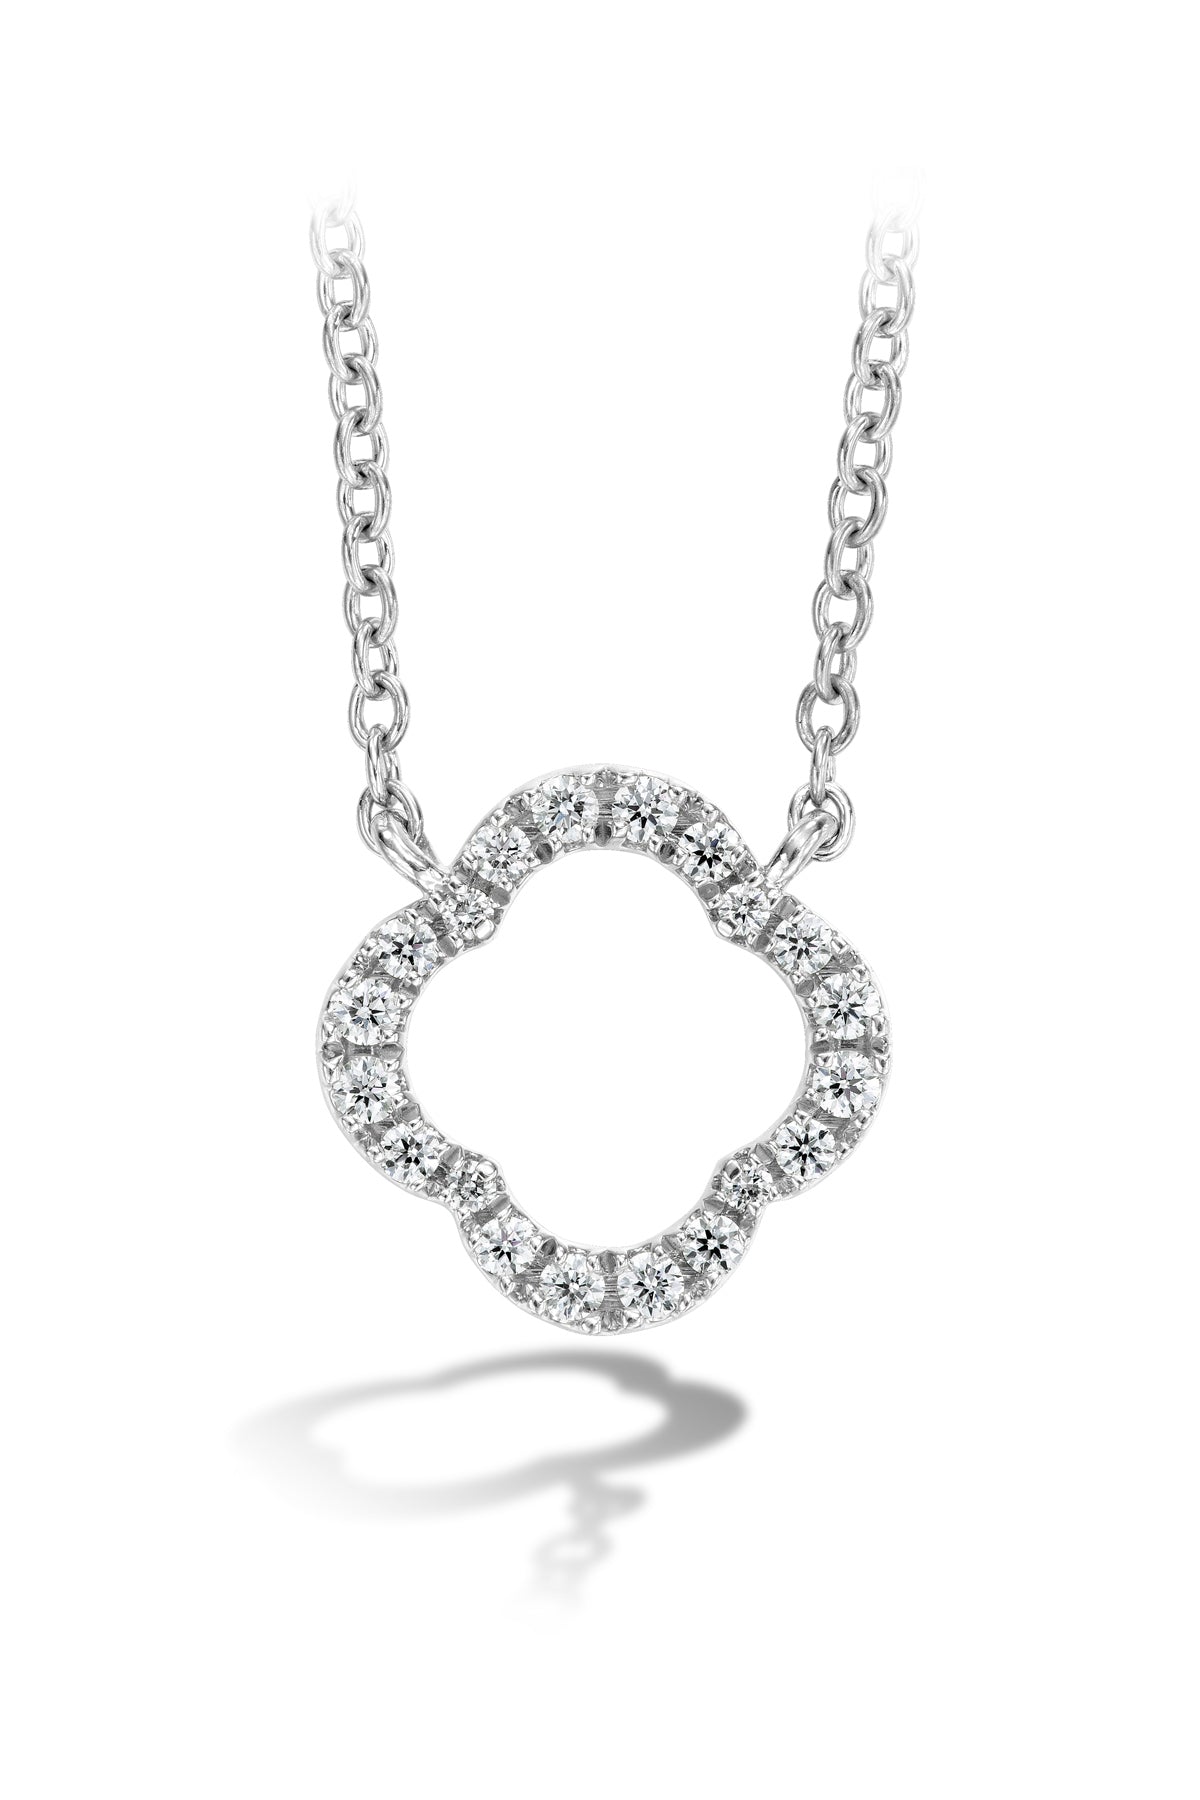 Small Signature Petal Pendant From Hearts On Fire available at LeGassick Diamonds and Jewellery Gold Coast, Australia.